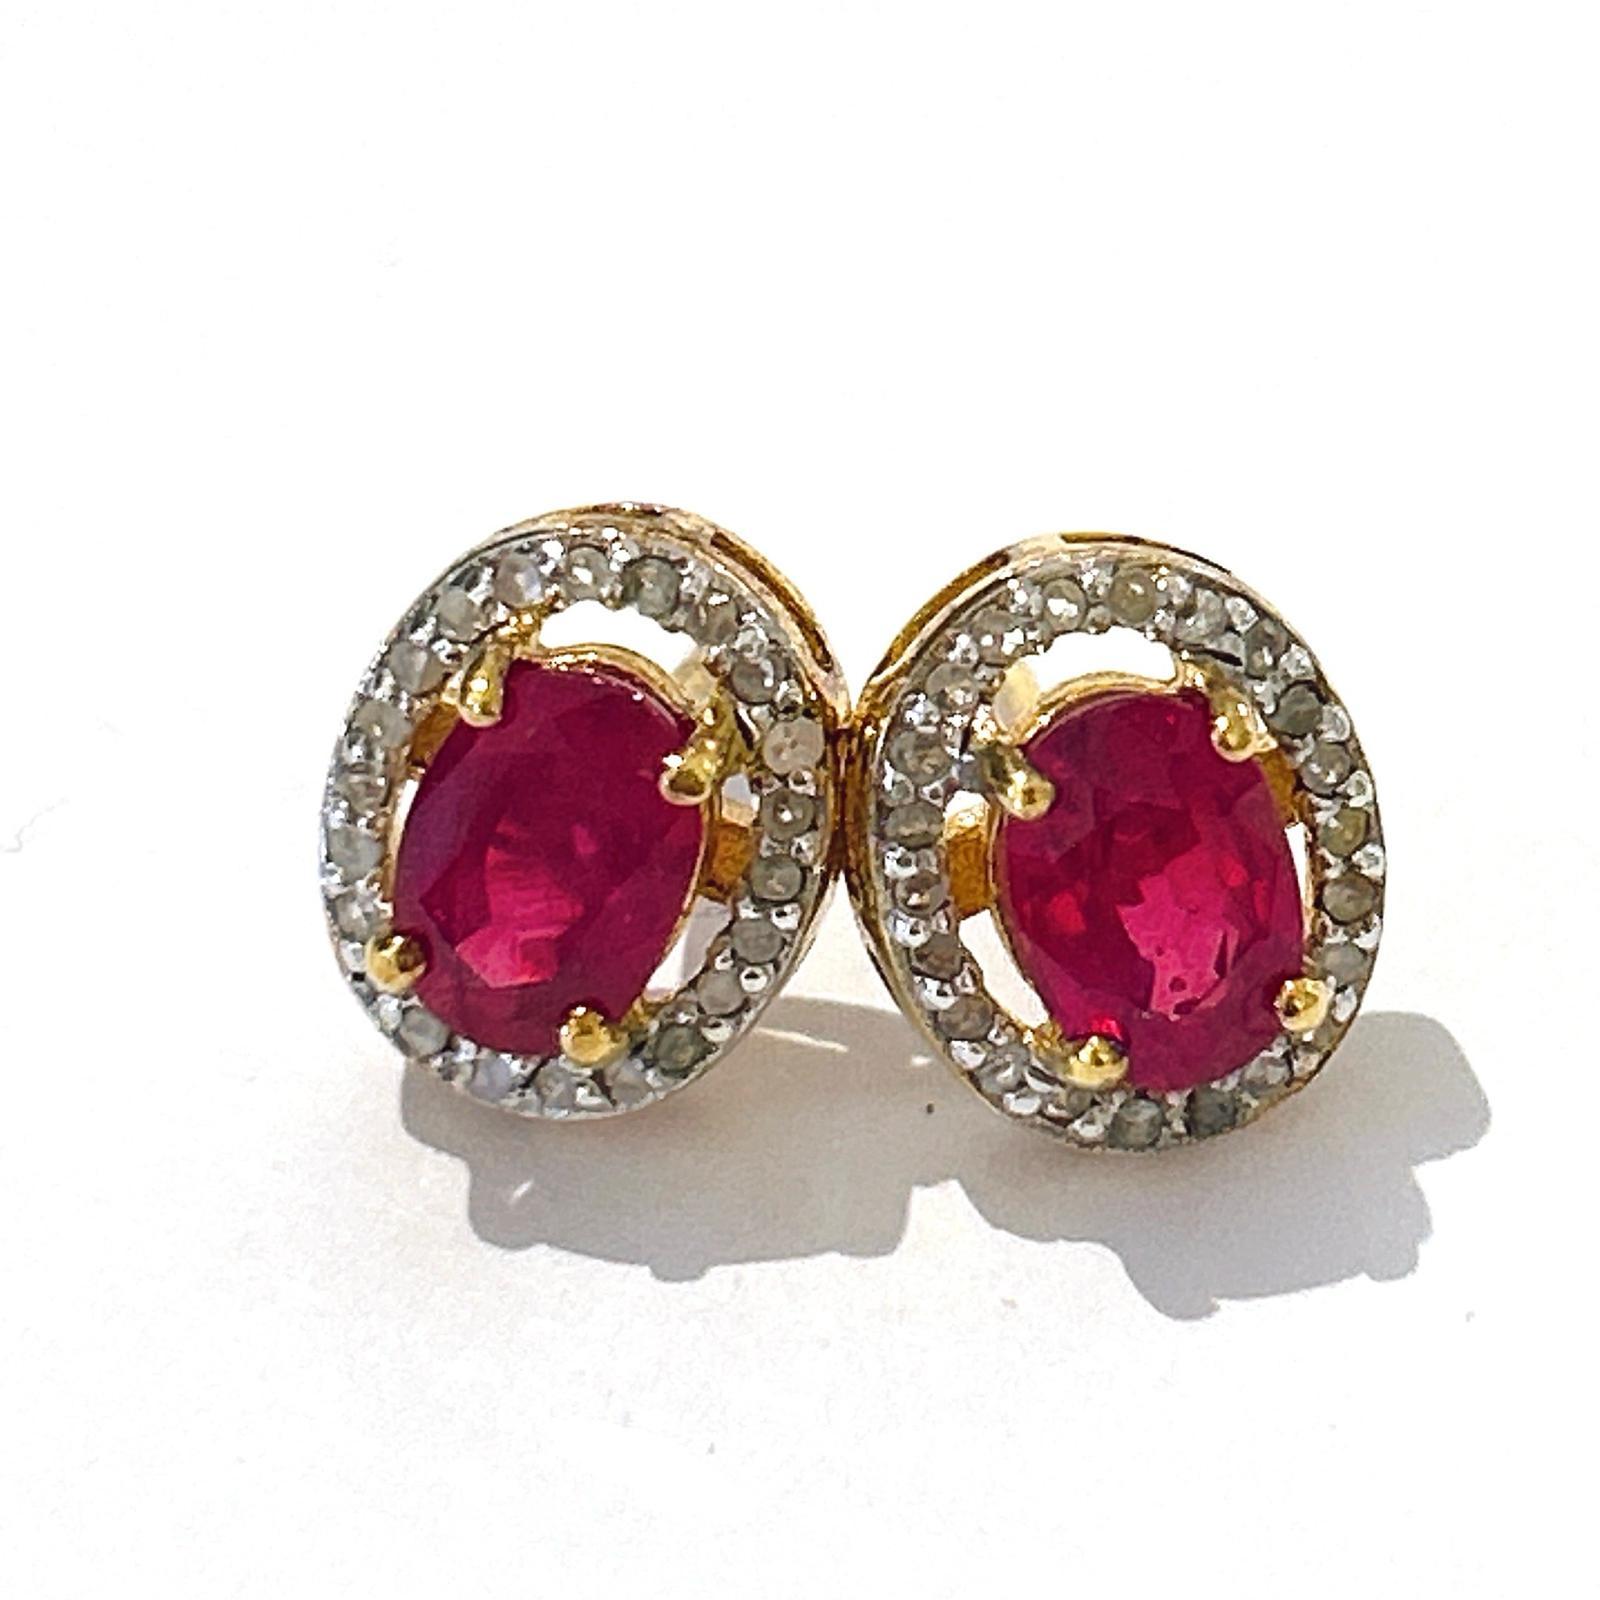 Bochic “Orient” Diamond & Ruby Stud Earrings Set In 18K Gold & Silver 

Natural red ruby, oval shape - 2 carats 
Natural gray single cut diamonds - 1 carat 


The earrings from the 